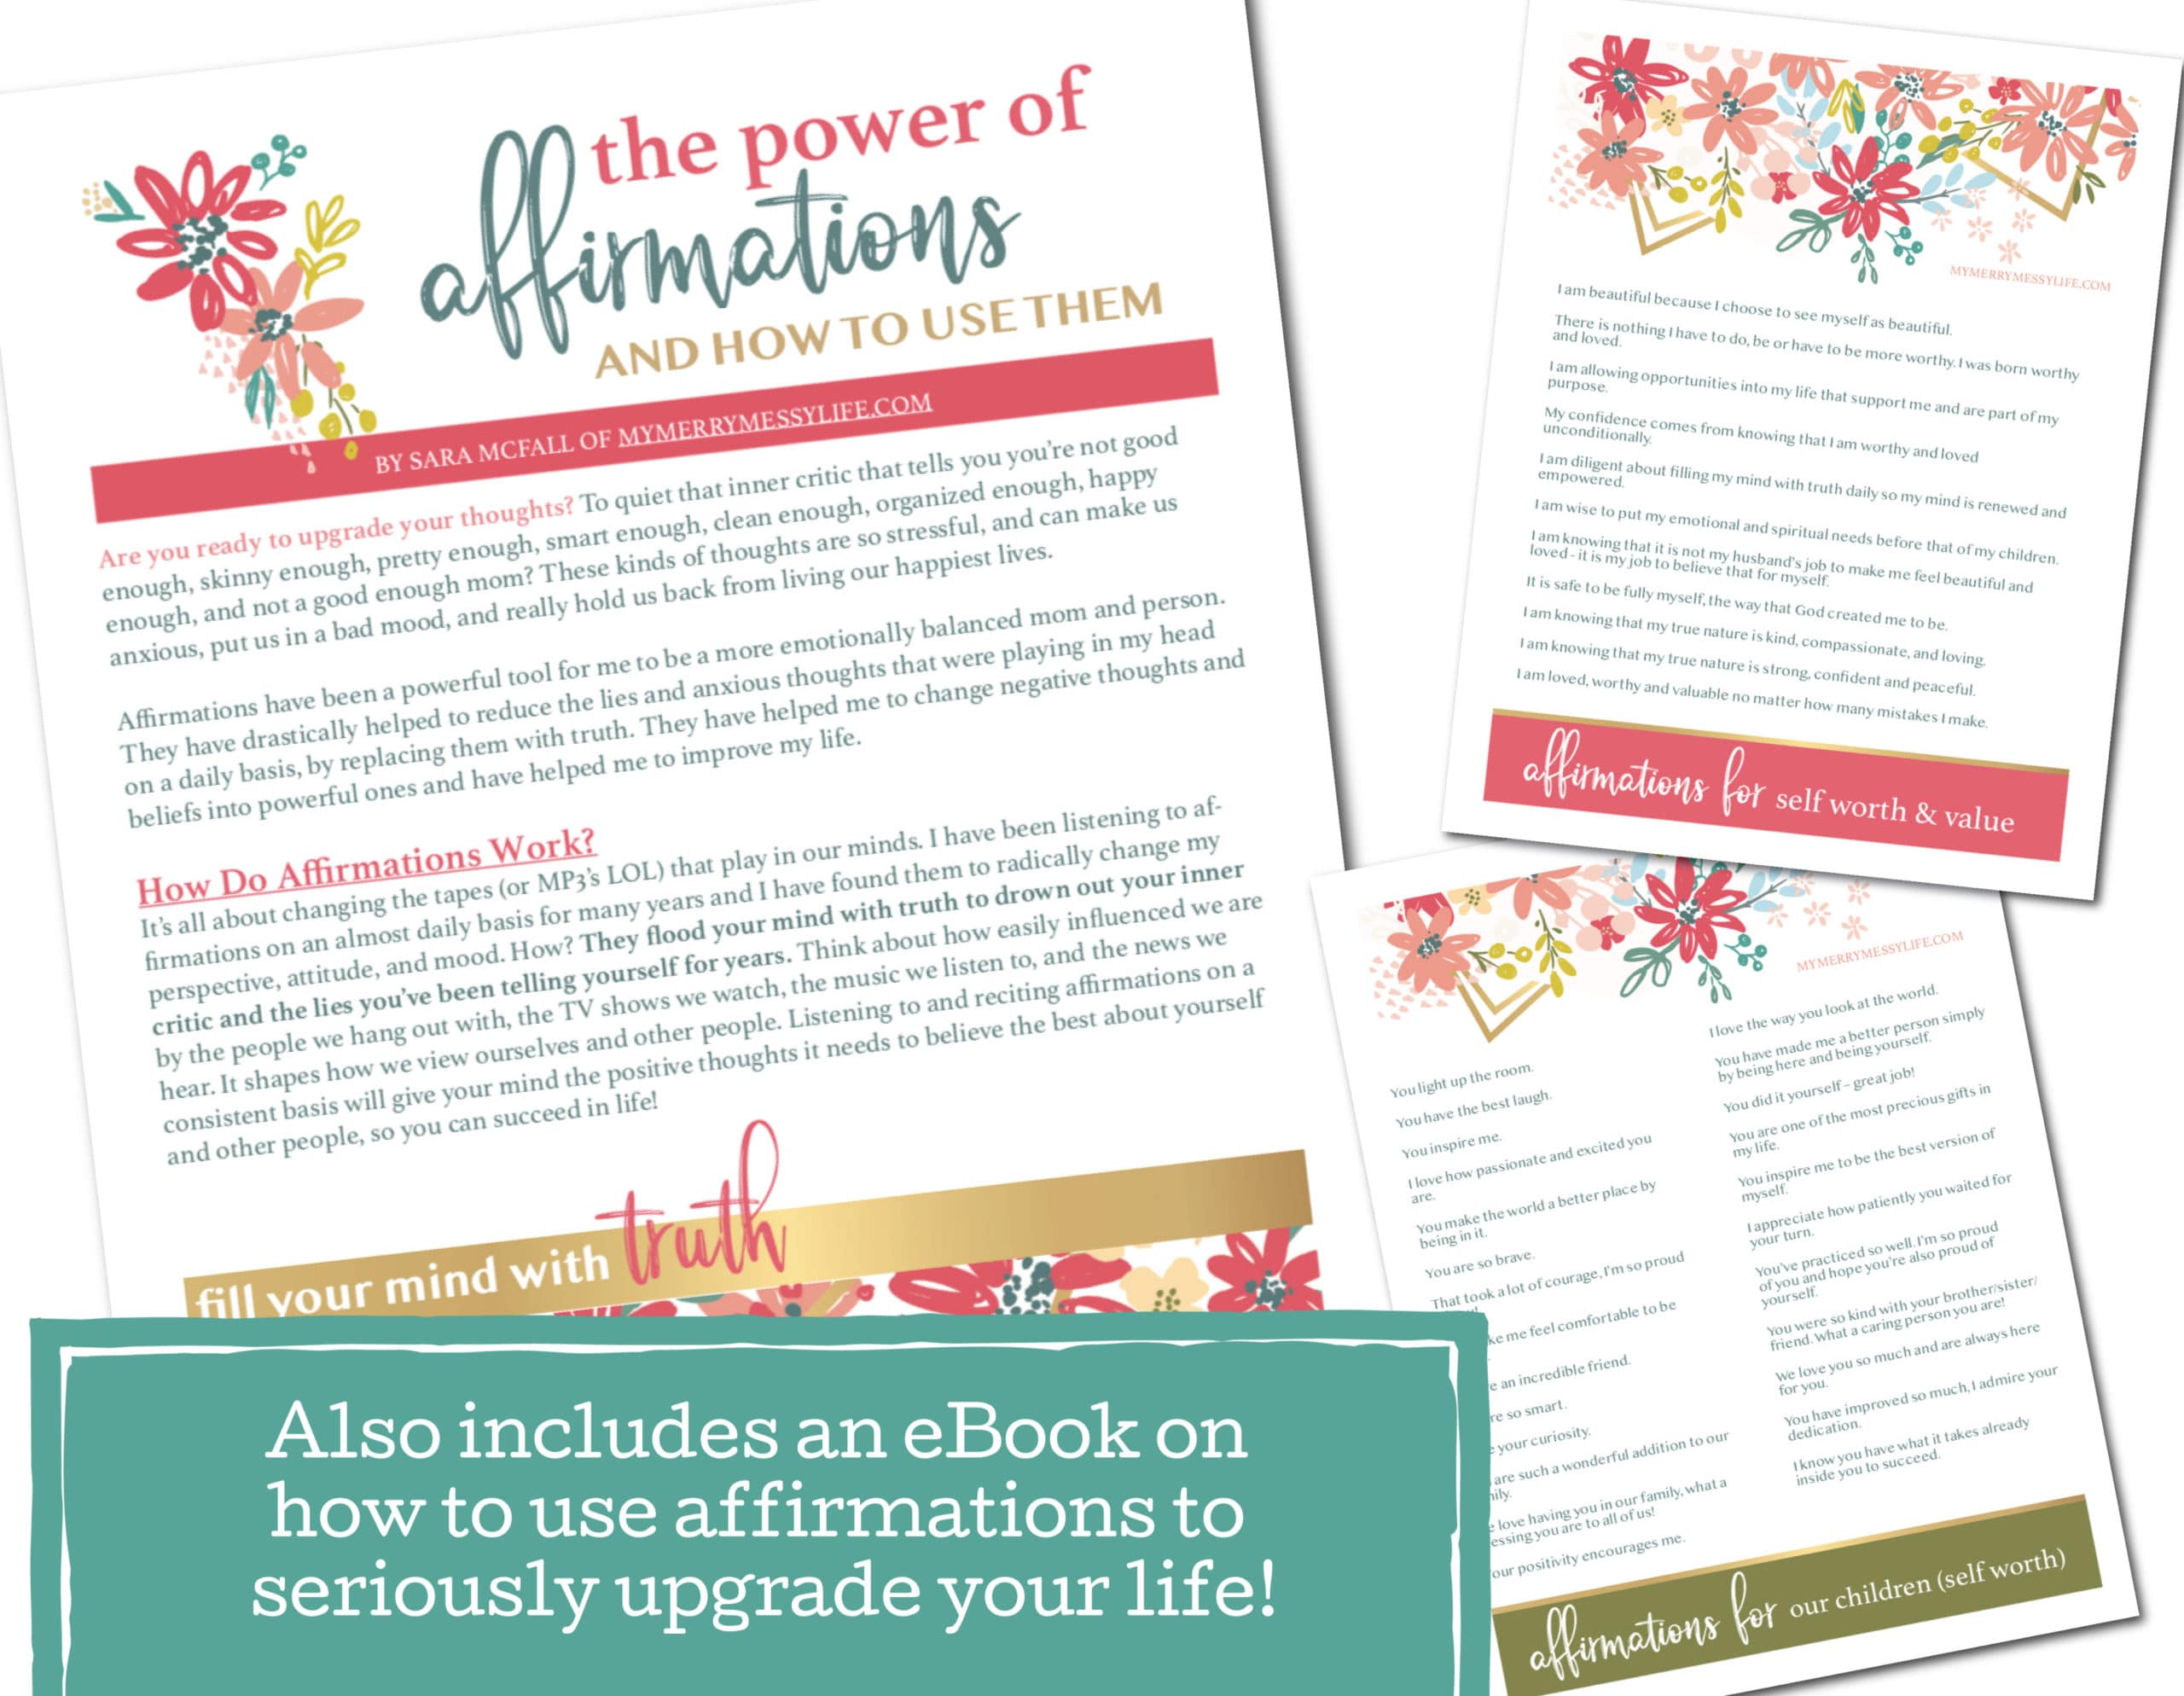 The Power of Affirmations and How to Use Them - eBook!